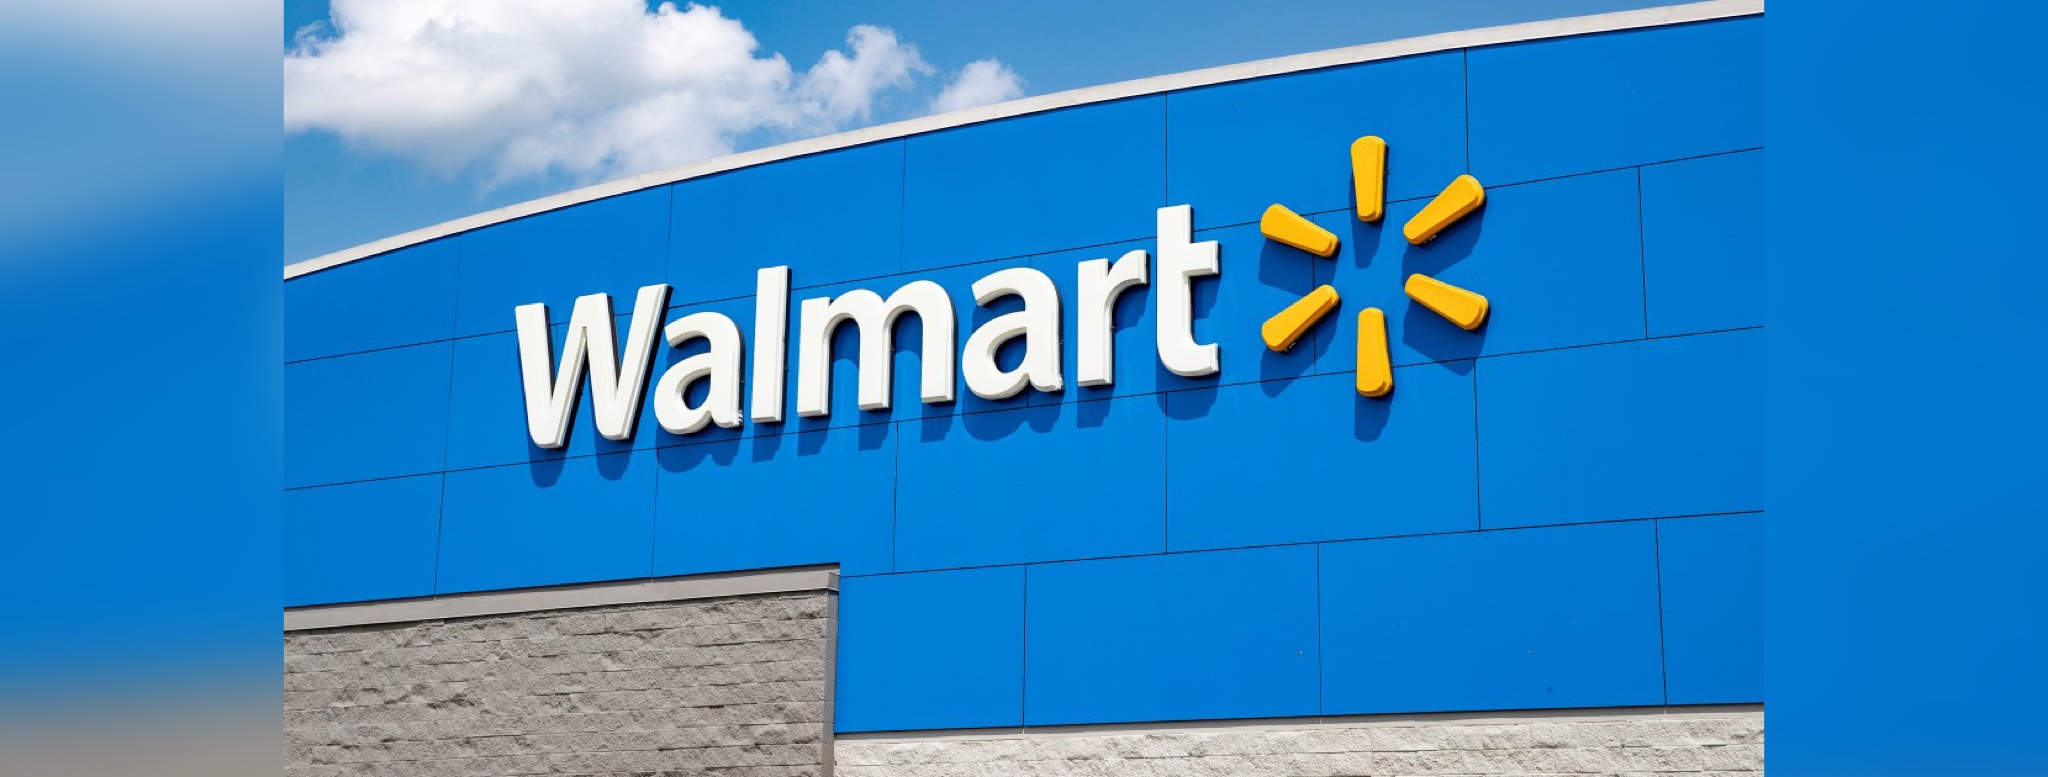 Walmart Sued After Parking Lot Fire Led To 6-Year-Old Girl's Death ...